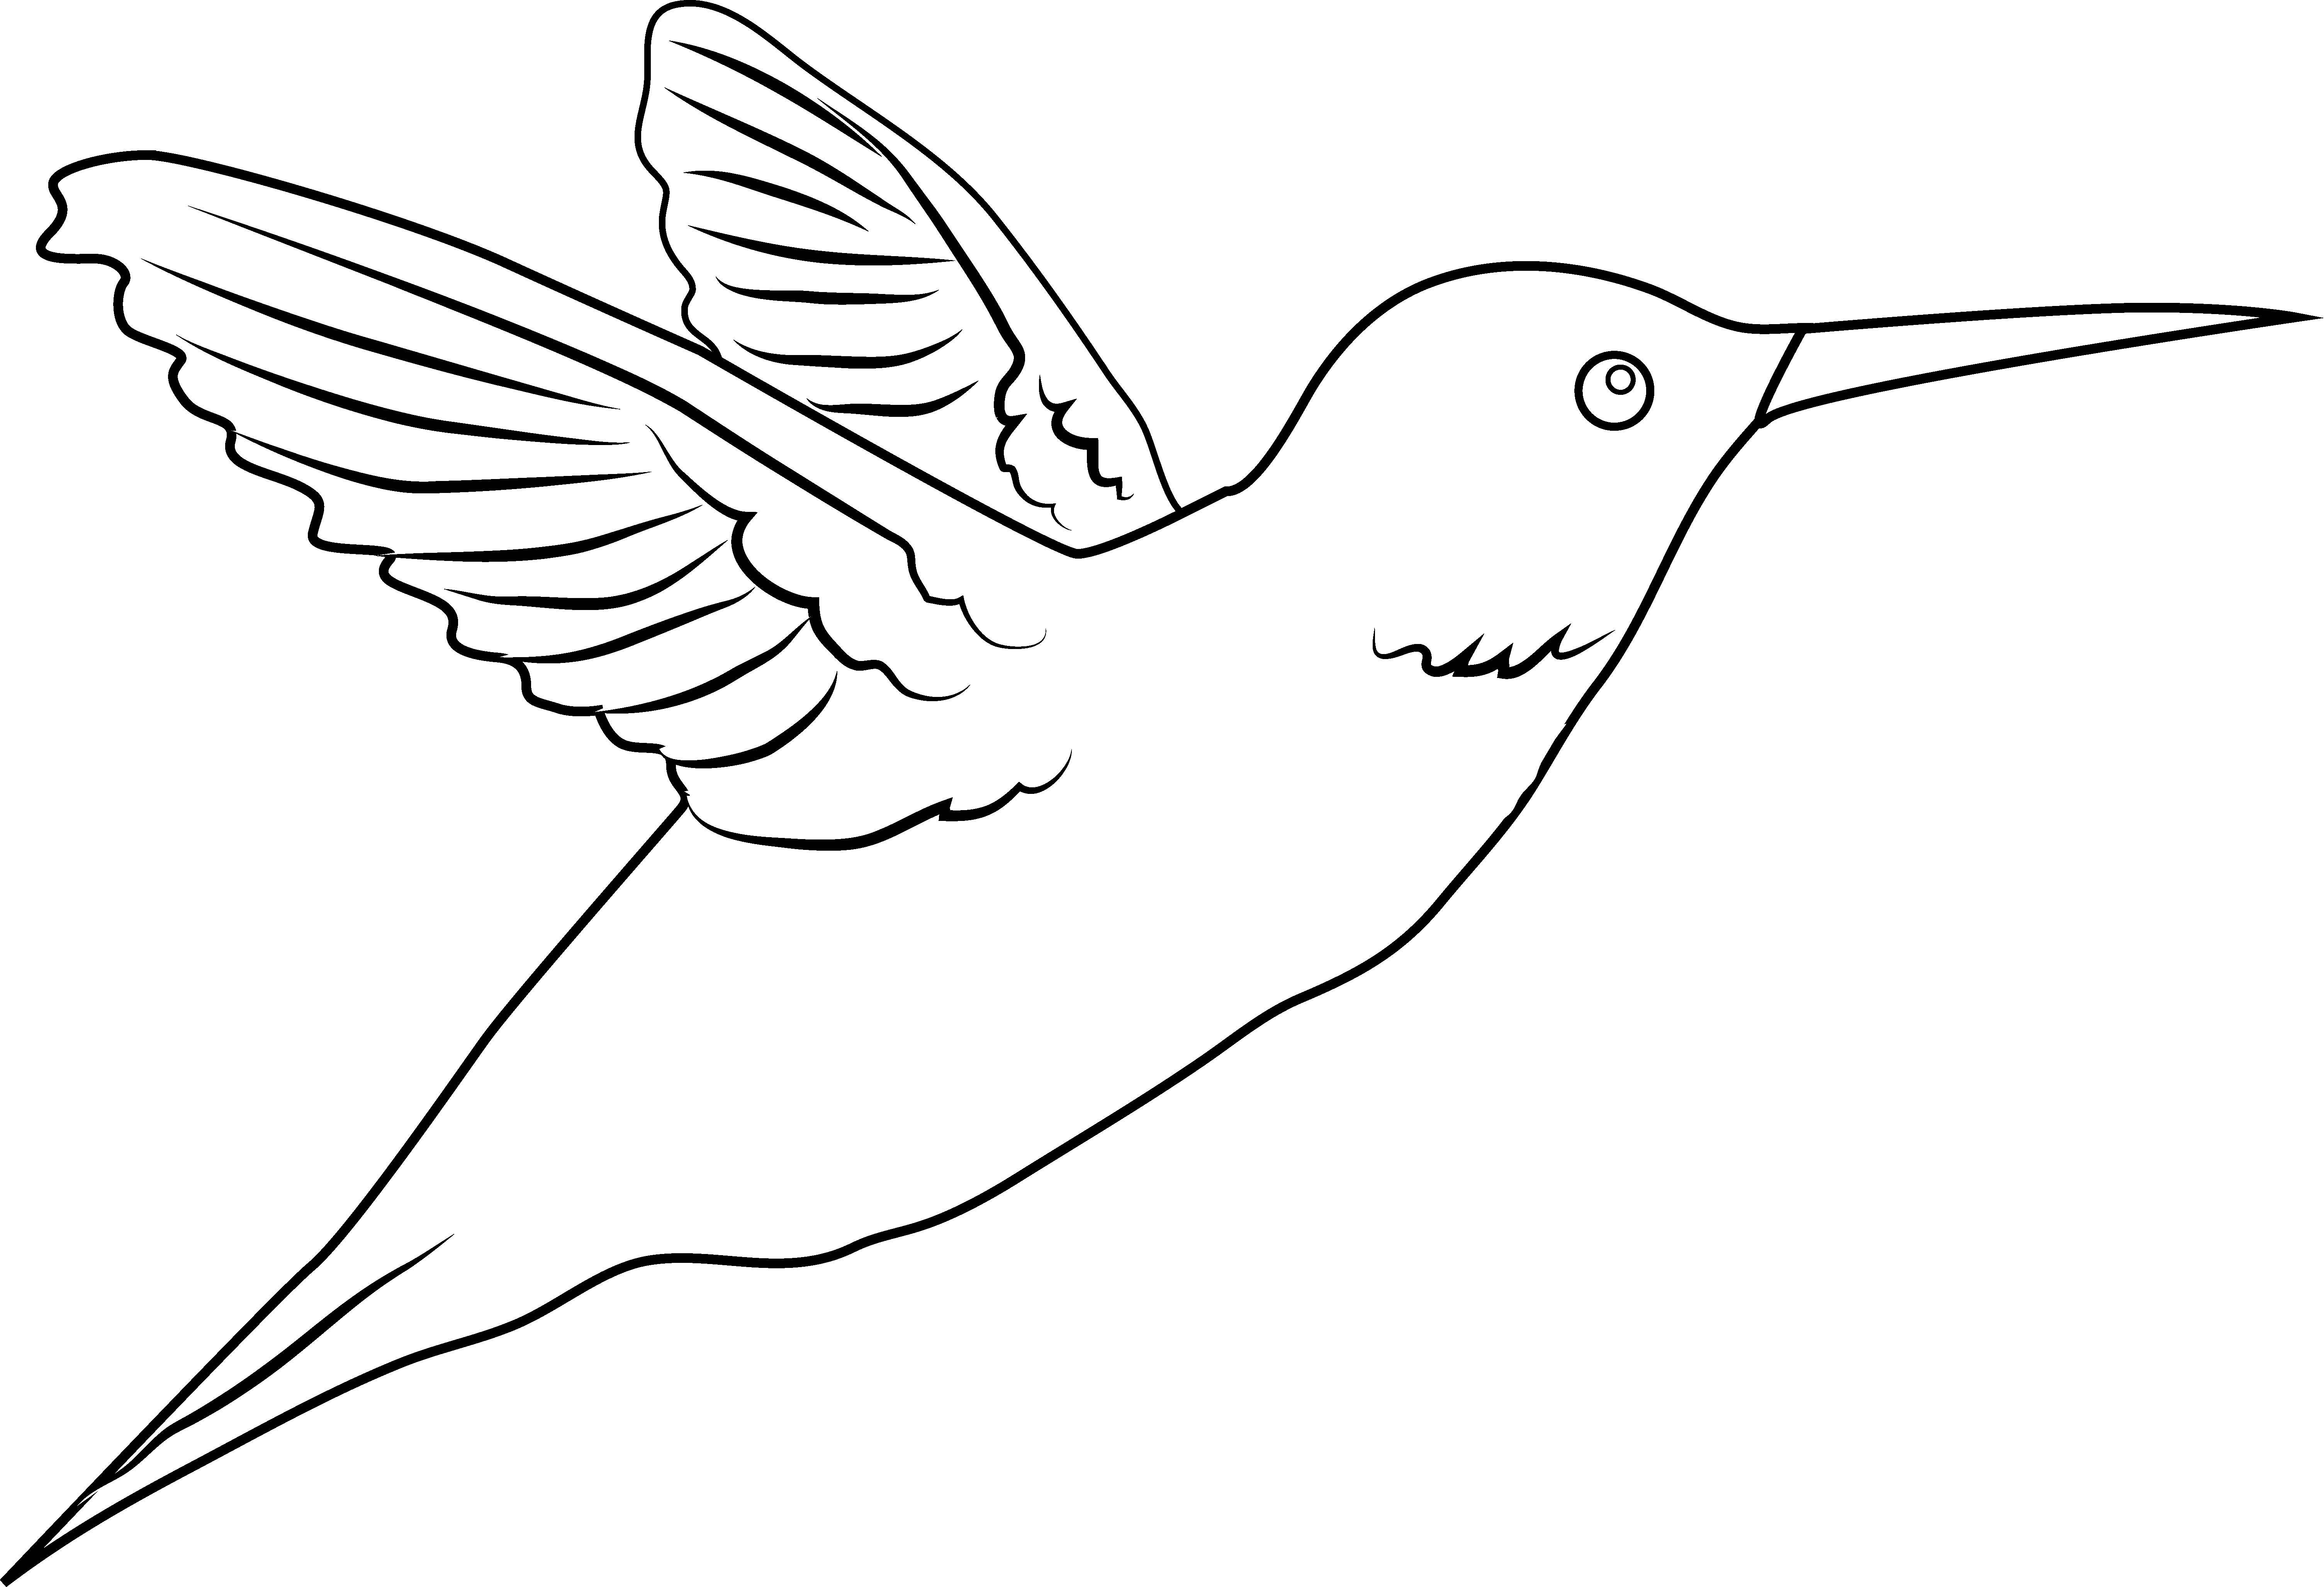 A White Bird With Wings Spread